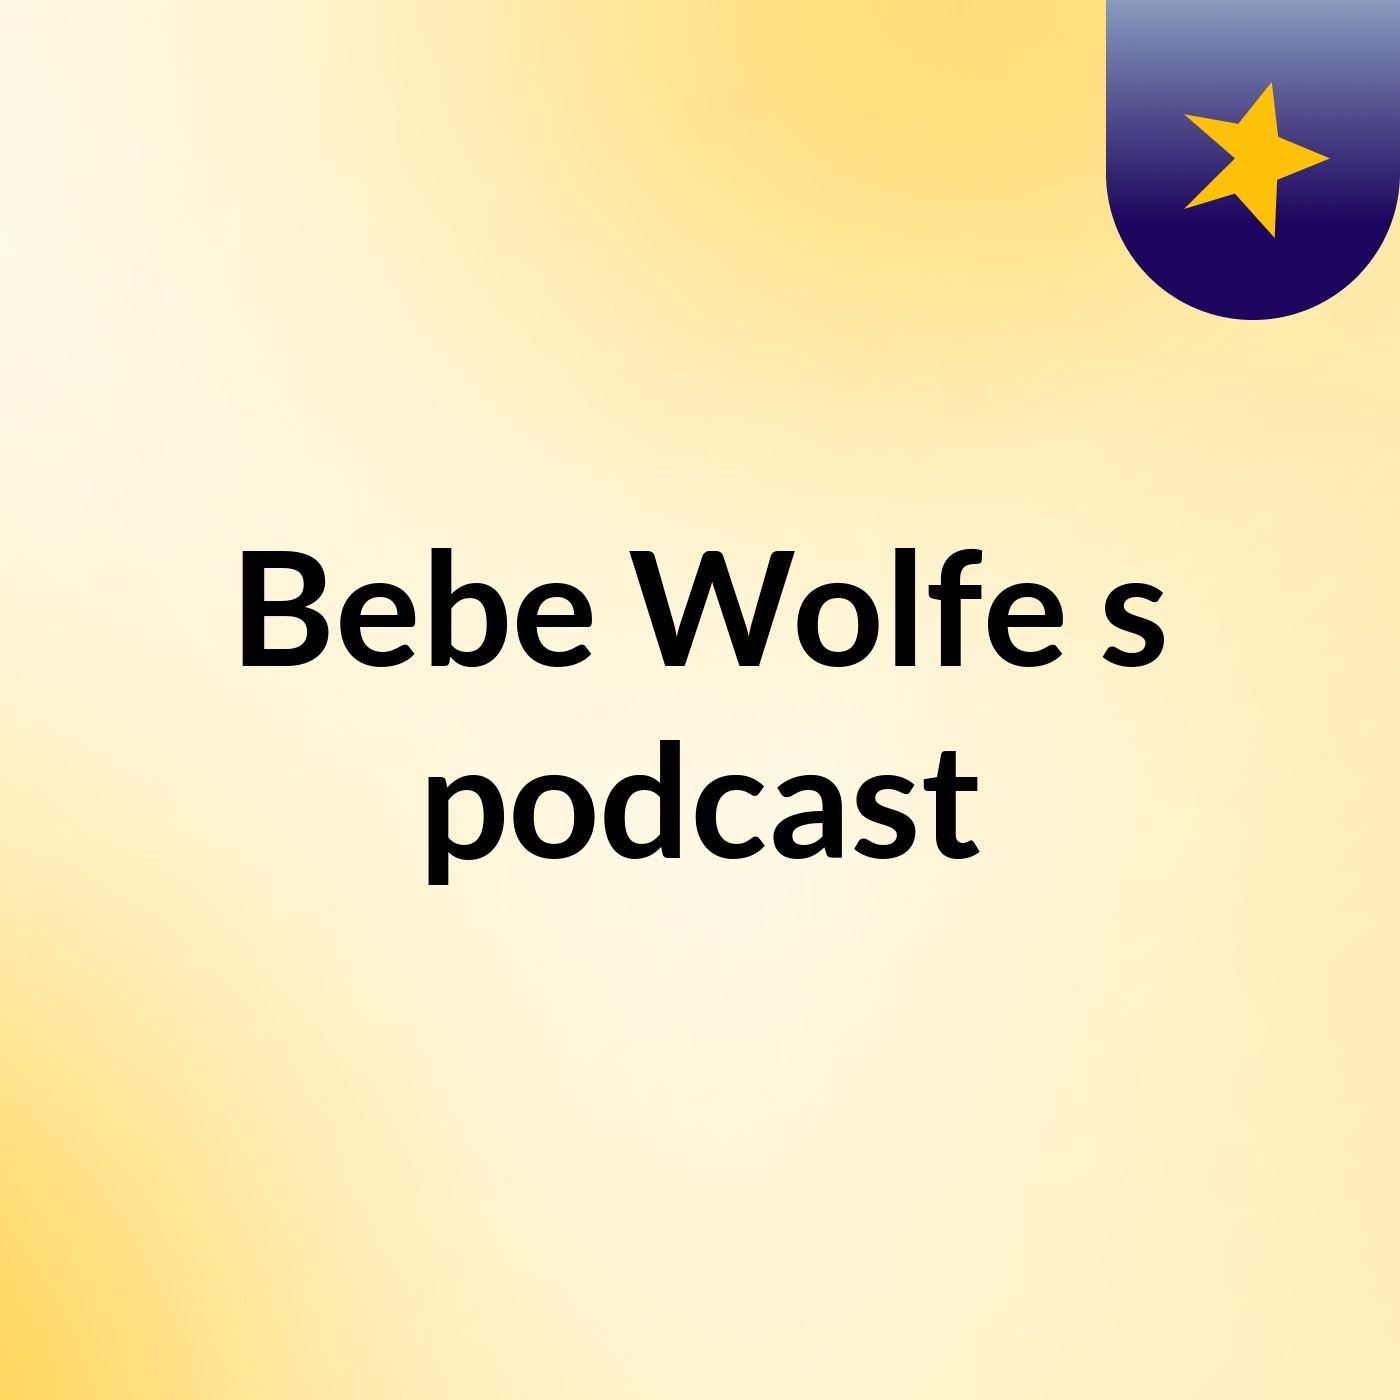 Bebe Wolfe's podcast